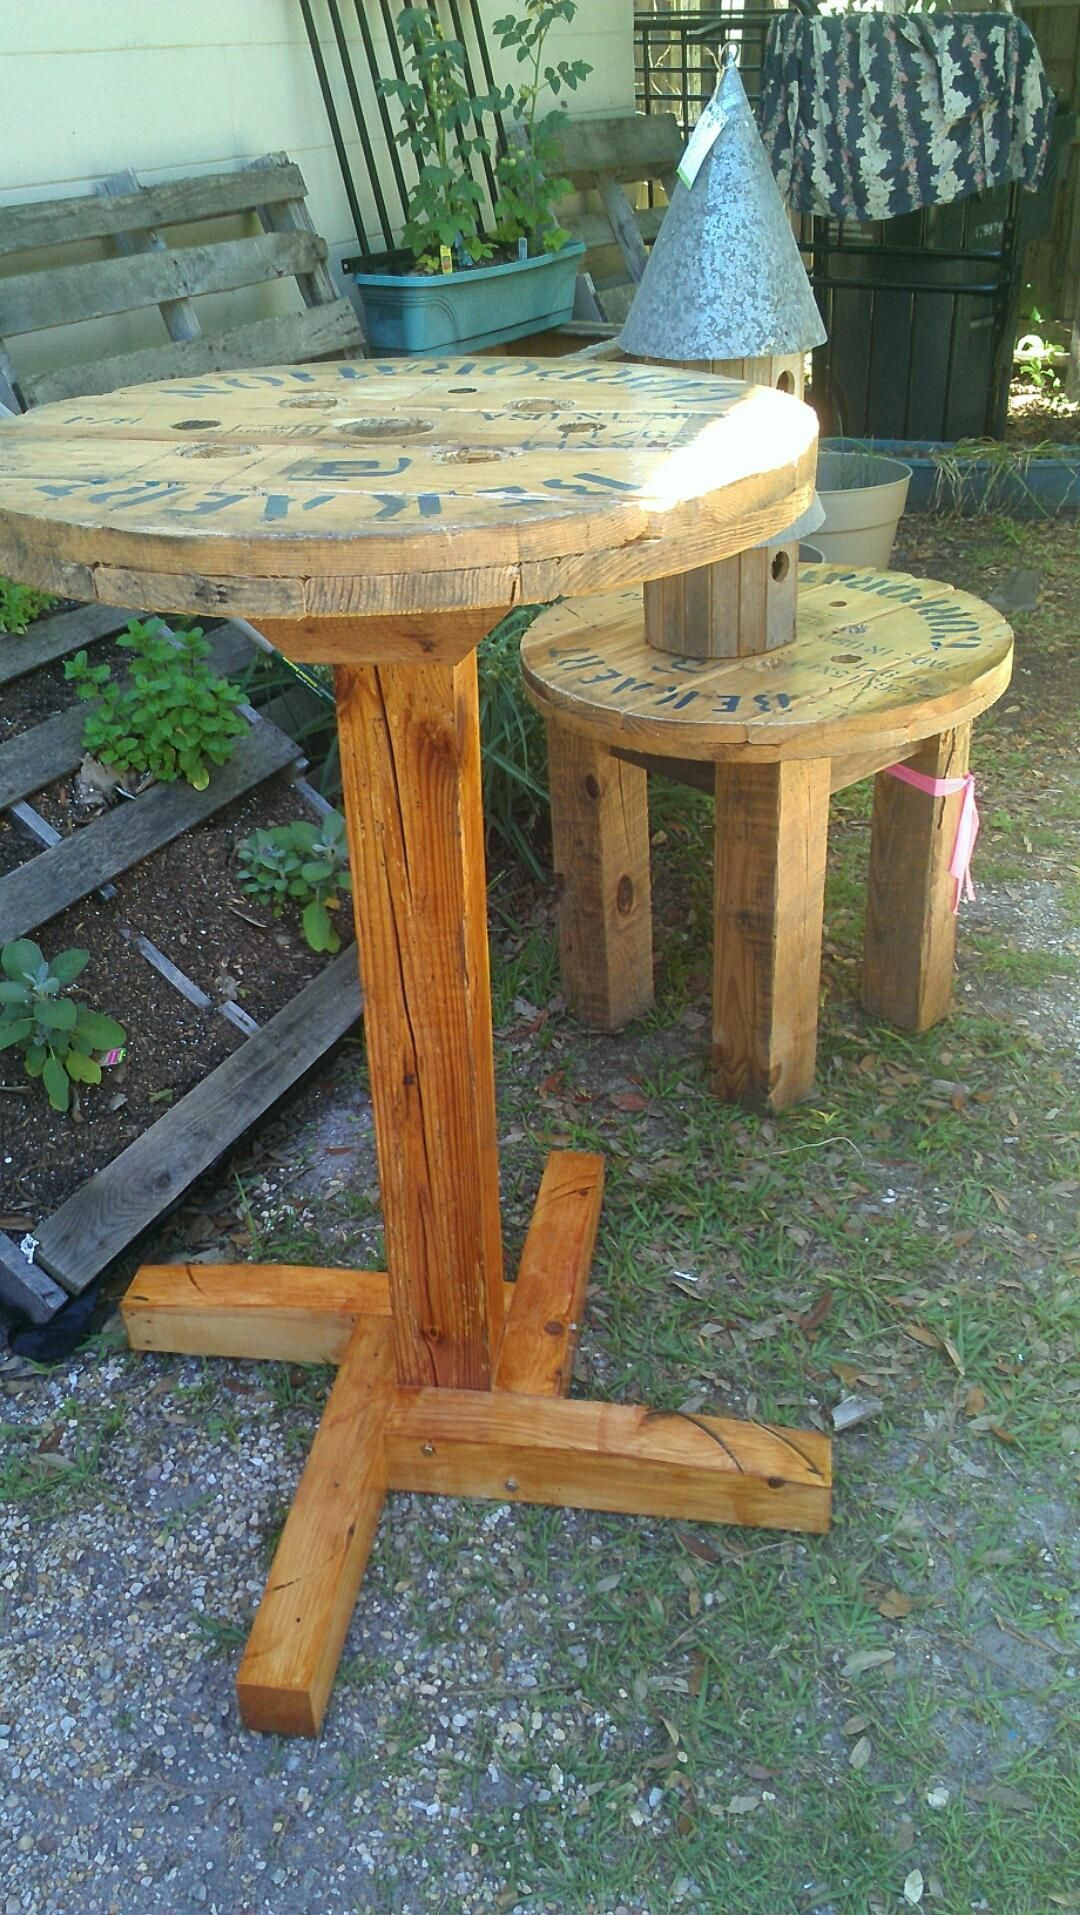 DIY Wooden Spool Projects
 Tables from old electrical wire spools